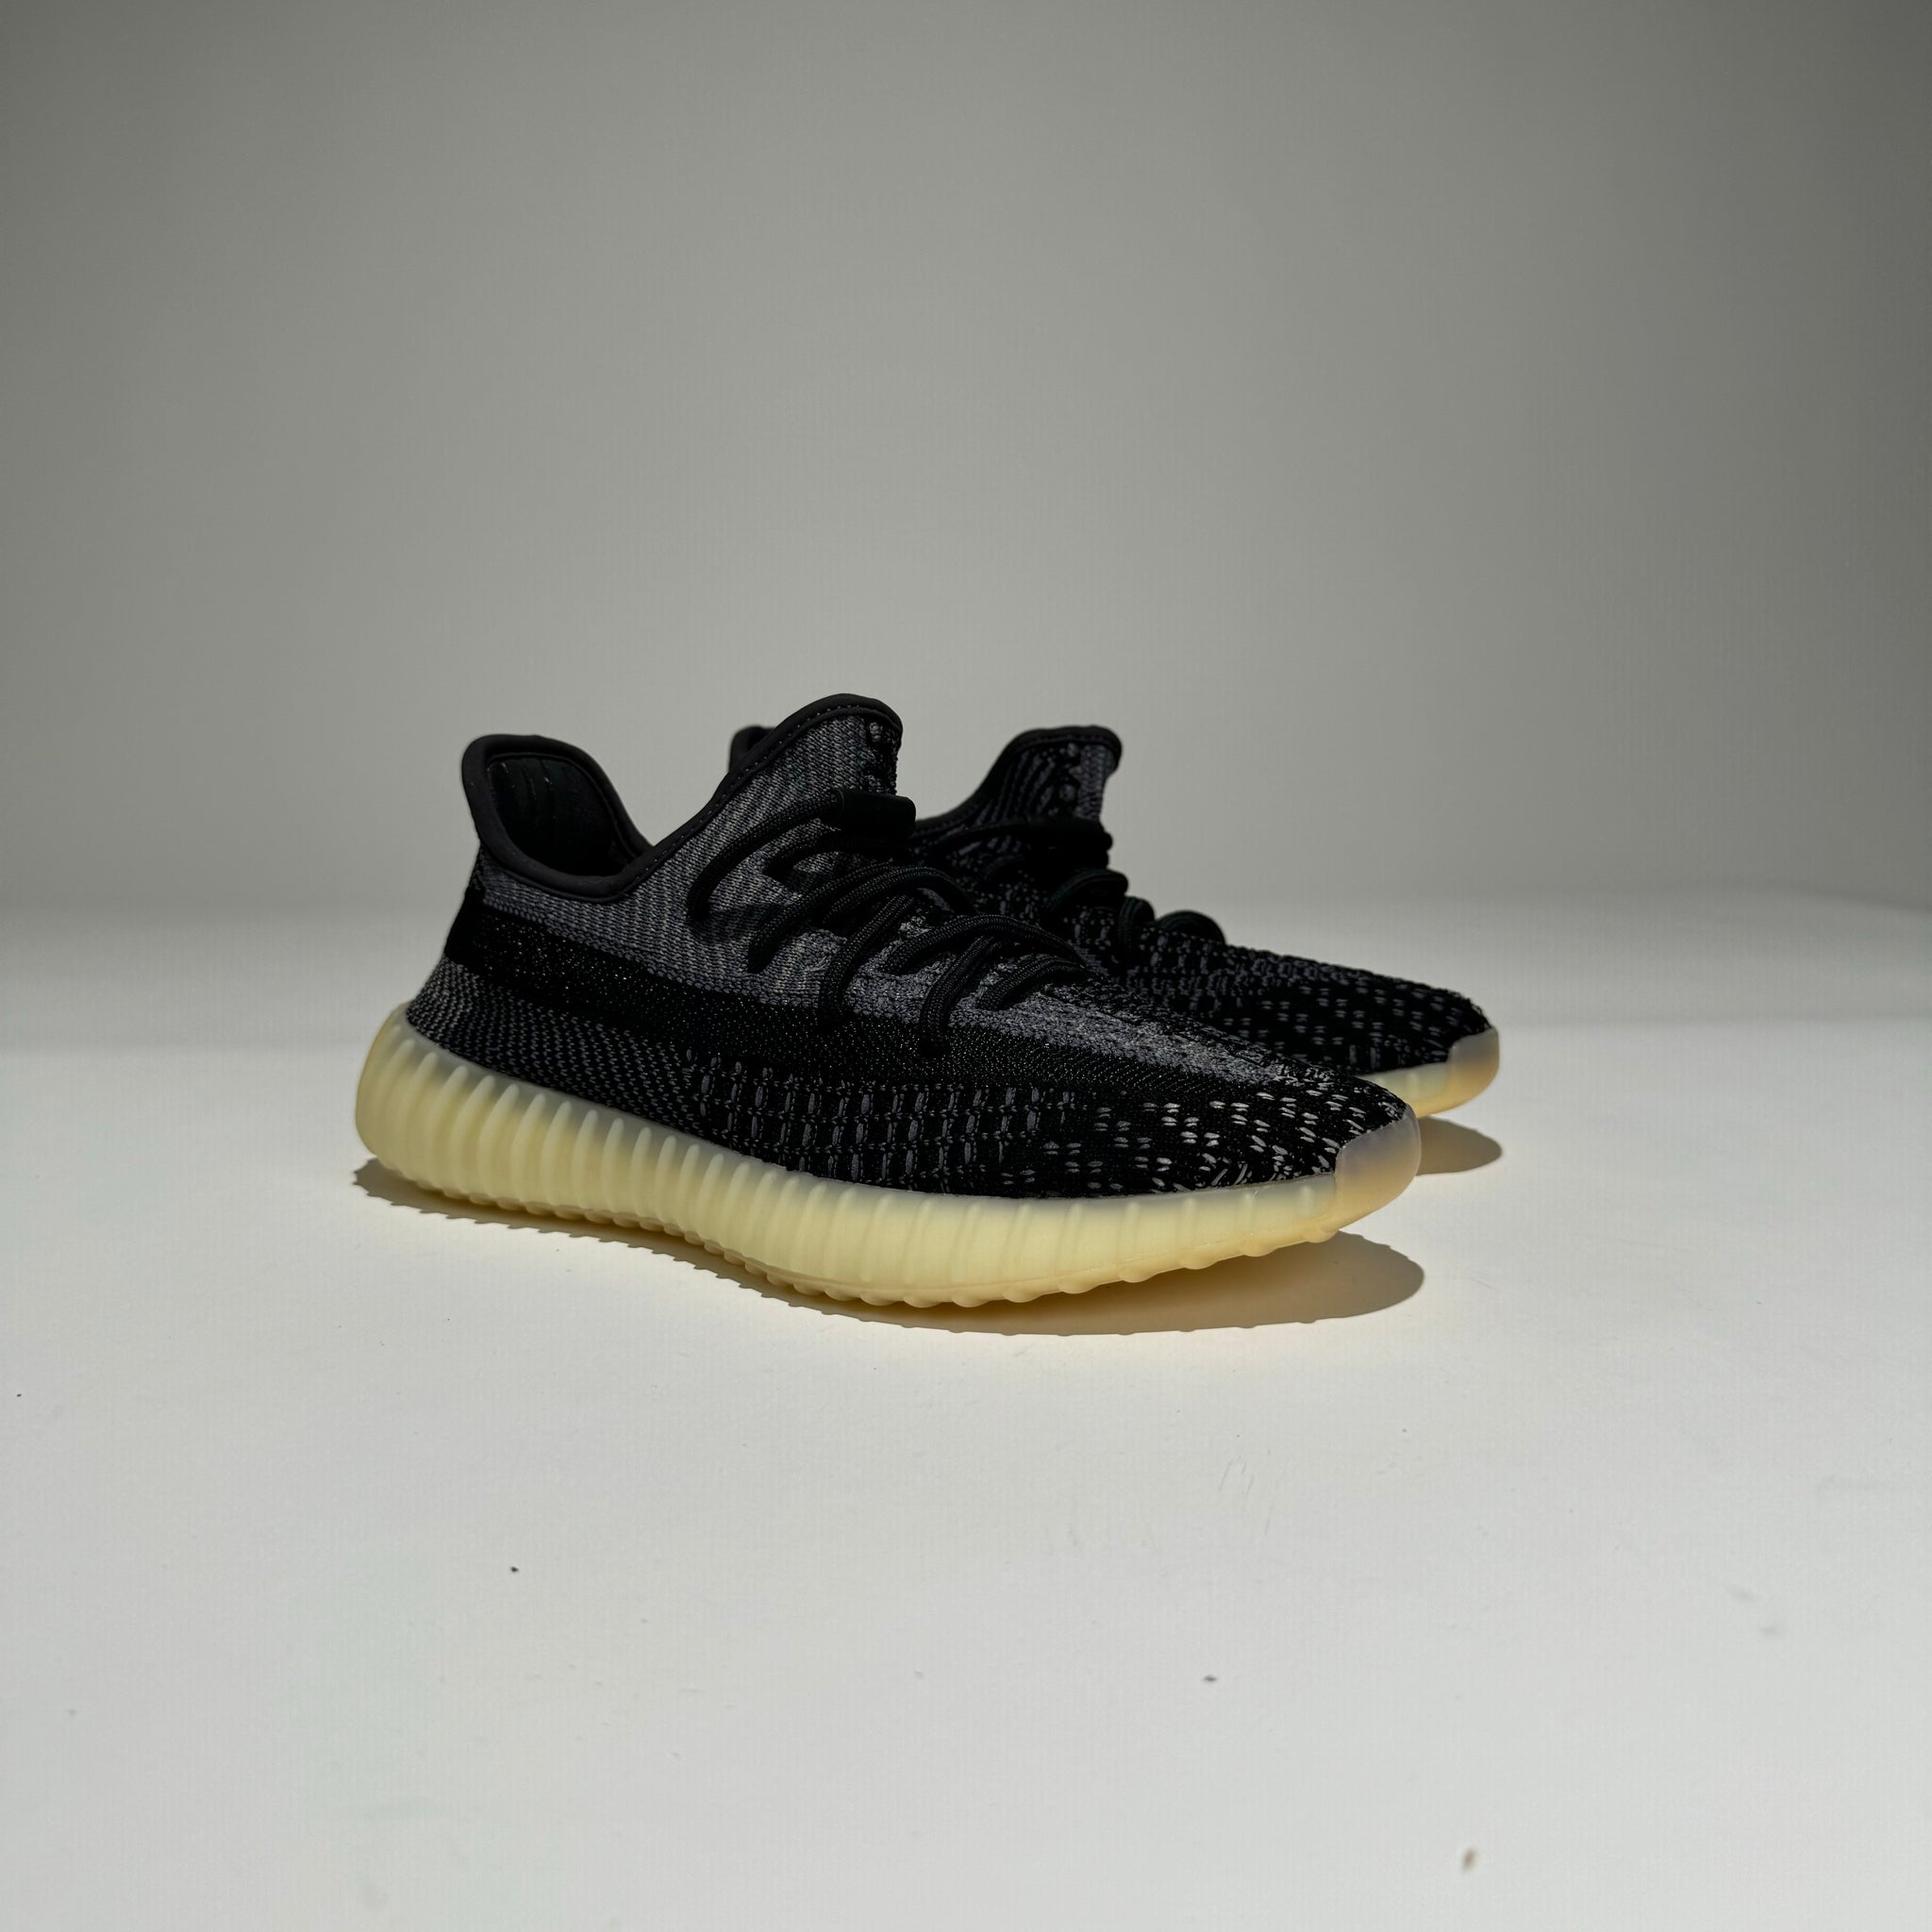 adidas Yeezy Boost 350 V2 Carbon (Used)-PLUS